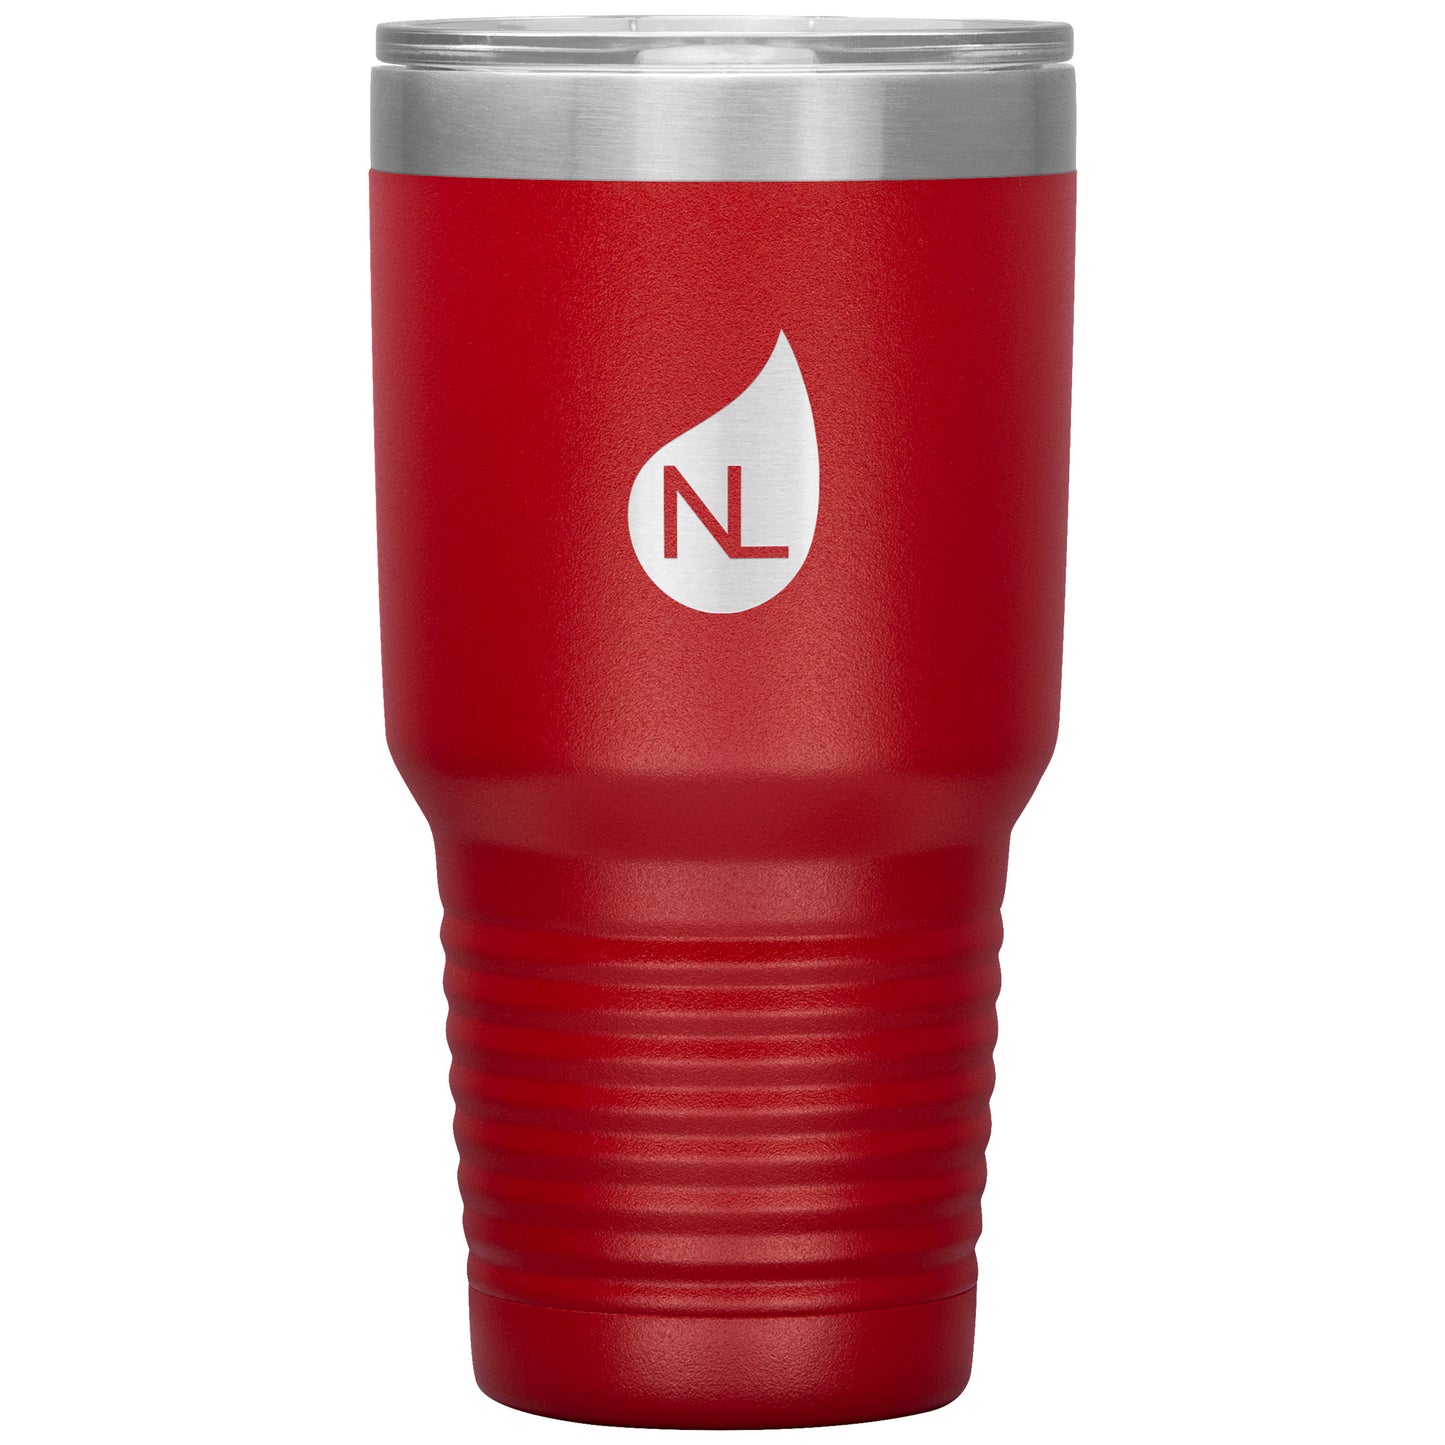 NL ICON Insulated Tumblers